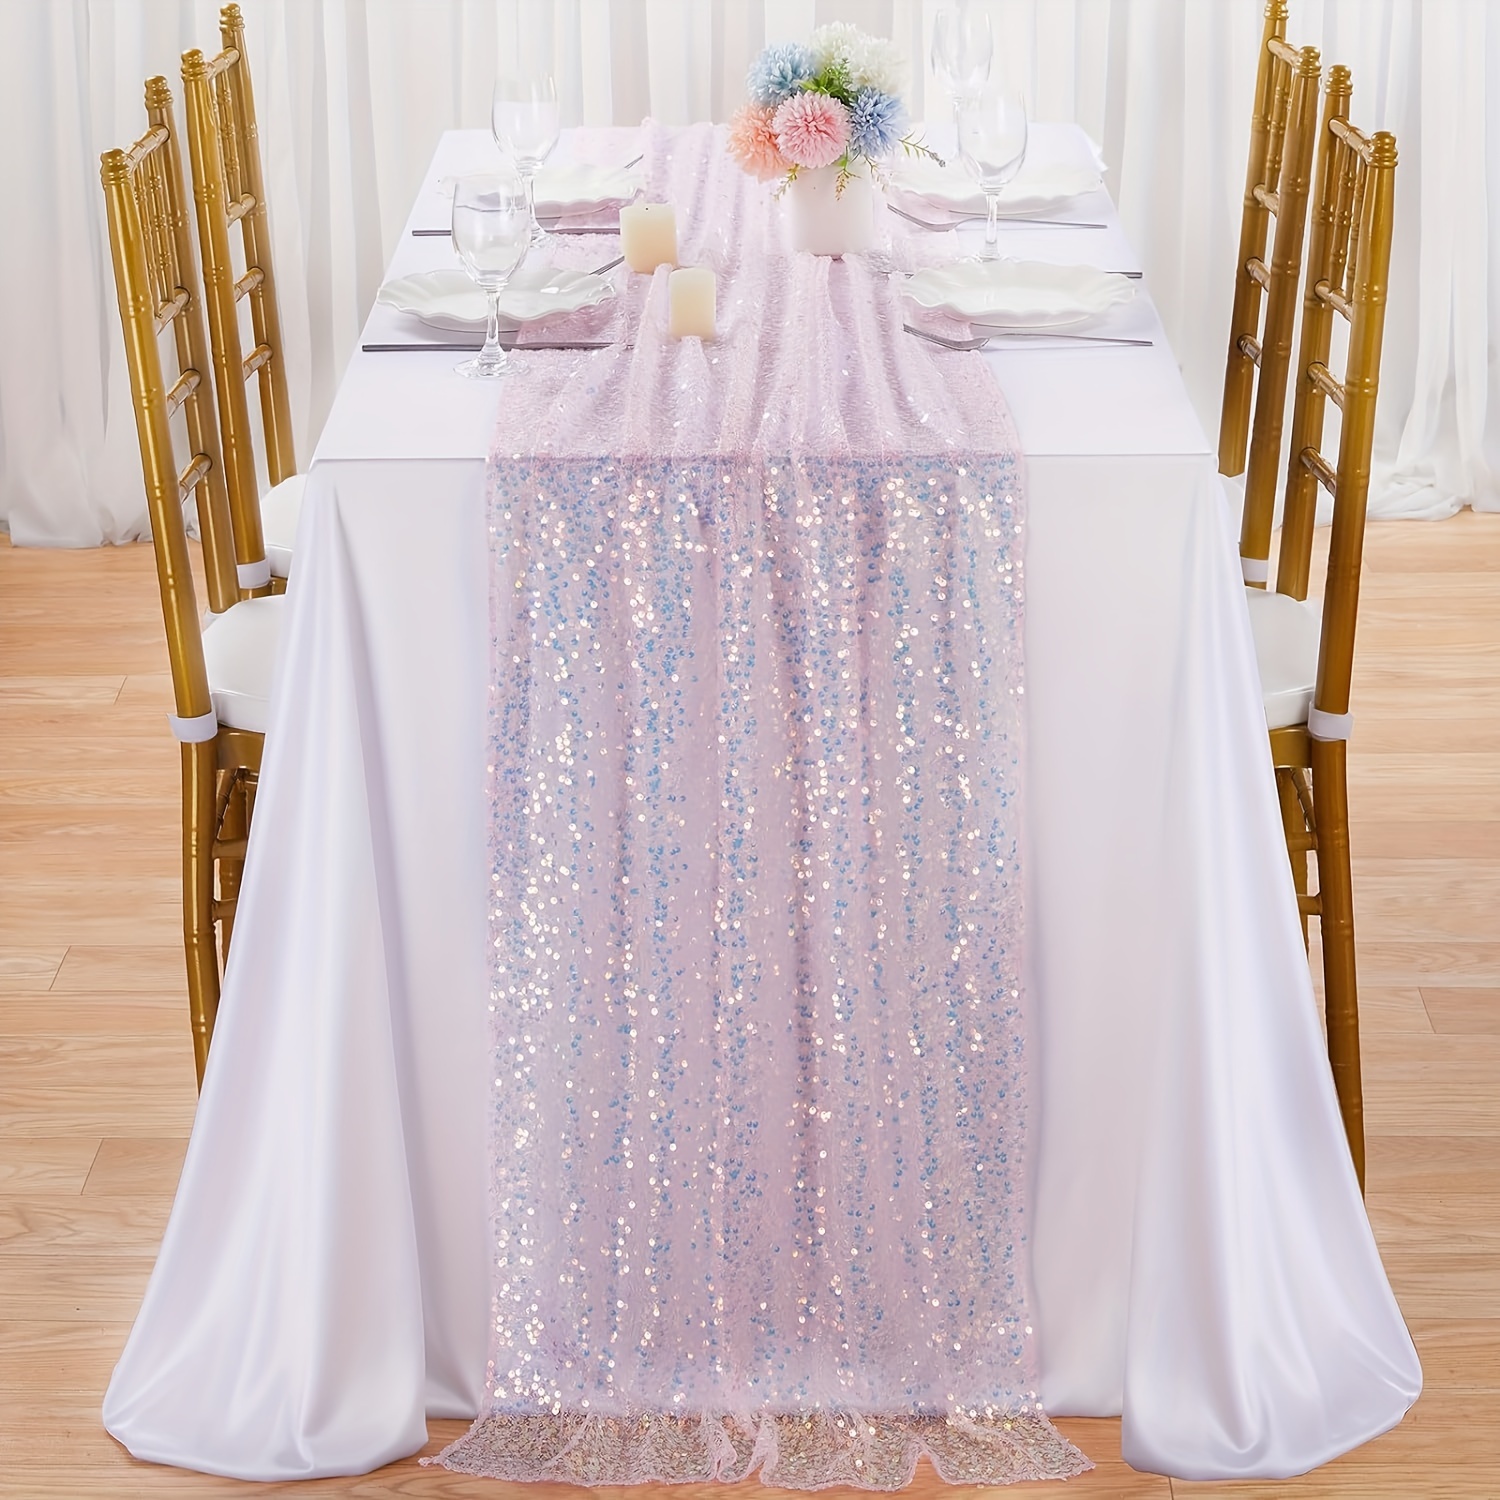 

Polyester Rectangle Table Runner With Sequins For Mermaid Themed Party, Wedding, Birthday - Woven Polyester Cover, Sparkling Pink Decoration For Under The Sea Party